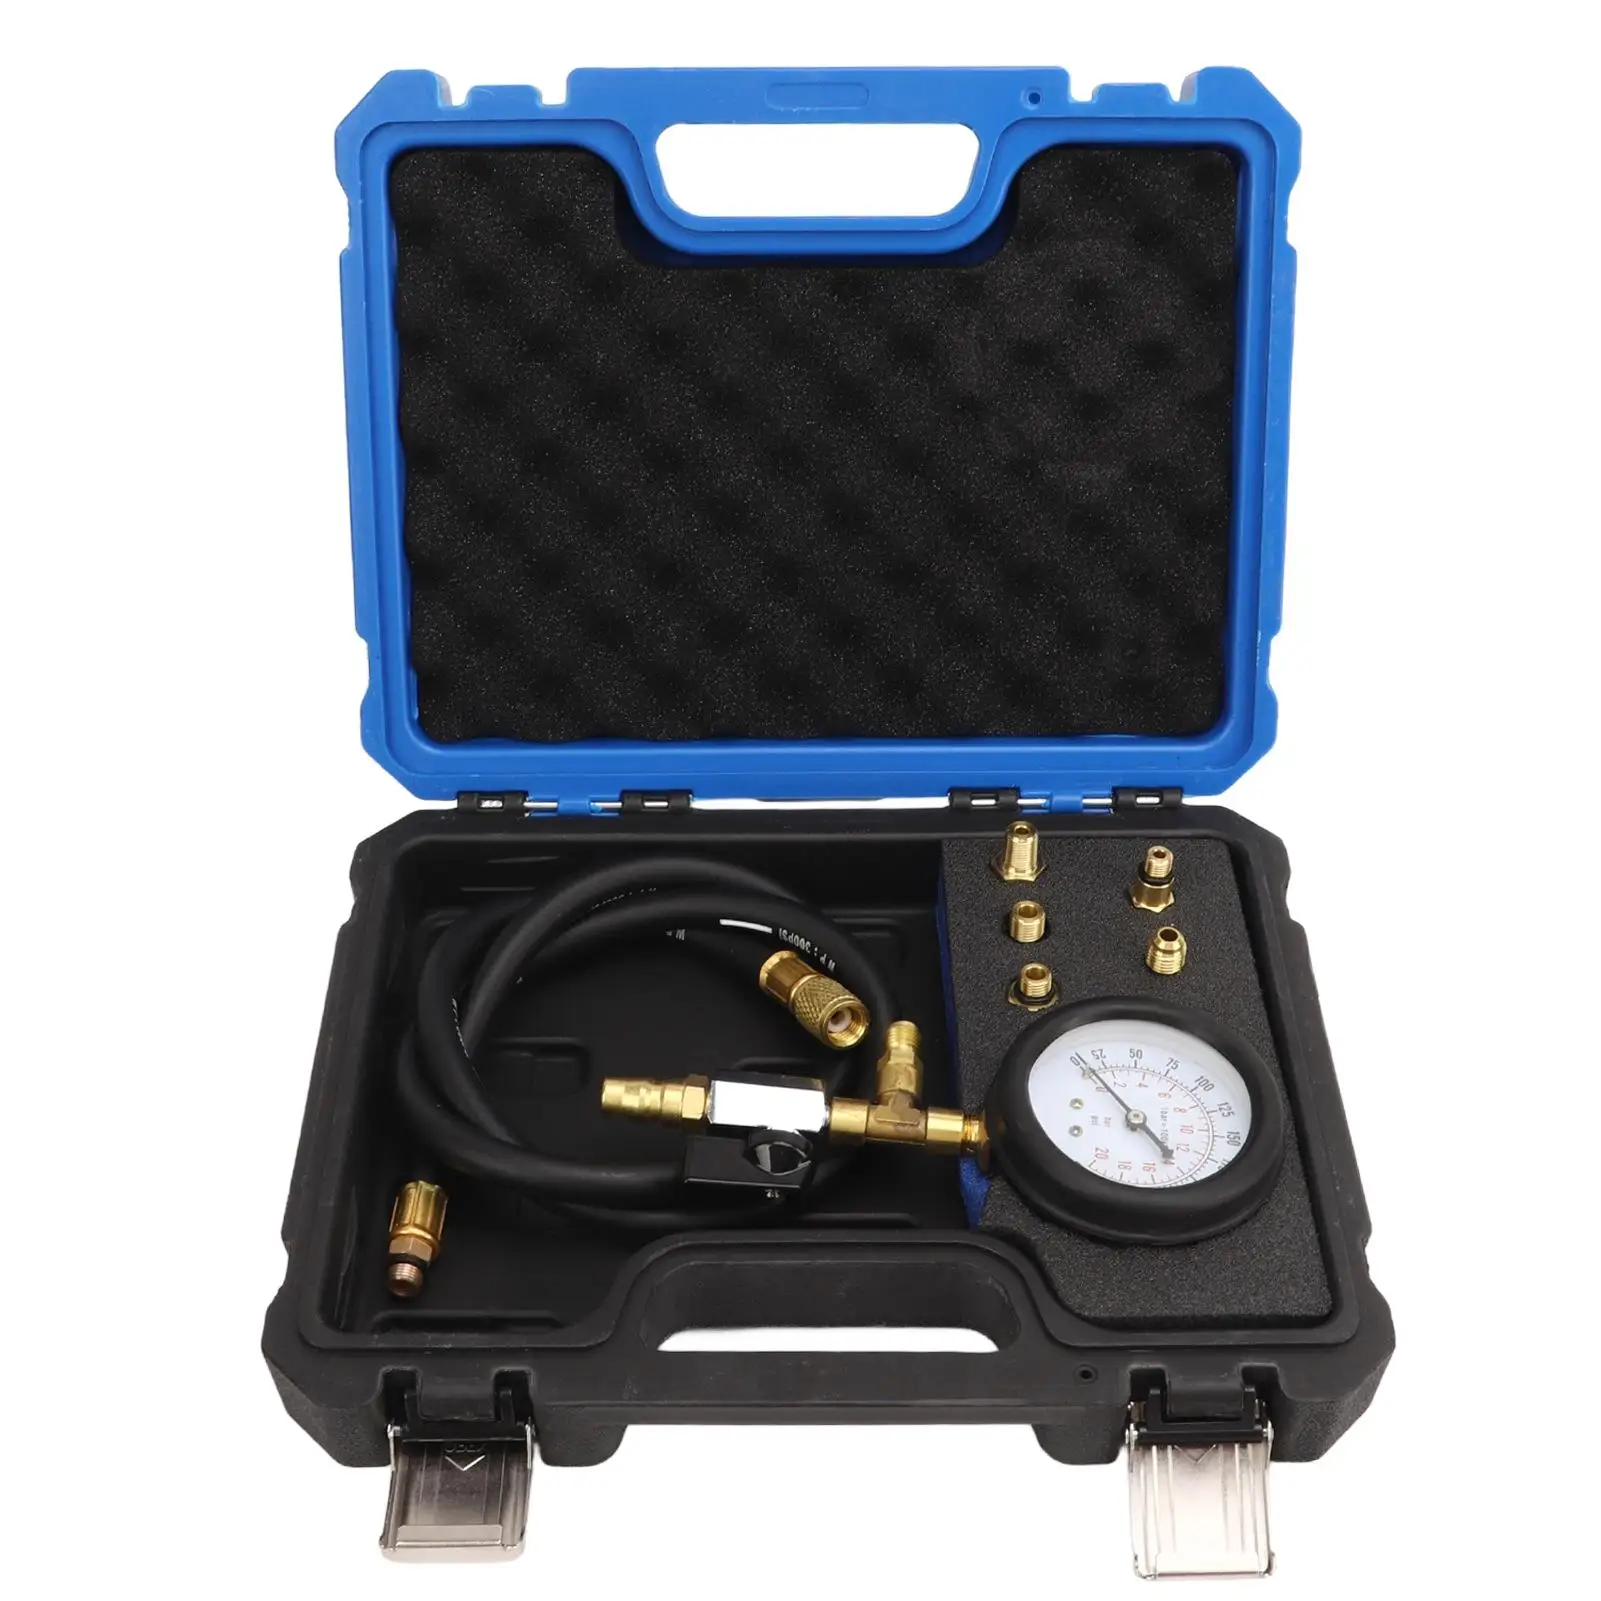 

Car Shock Absorber Leakage Tester ABS Metal, Low Error, Reliable Hose Professional Grade For Vehicle Air Suspension Test